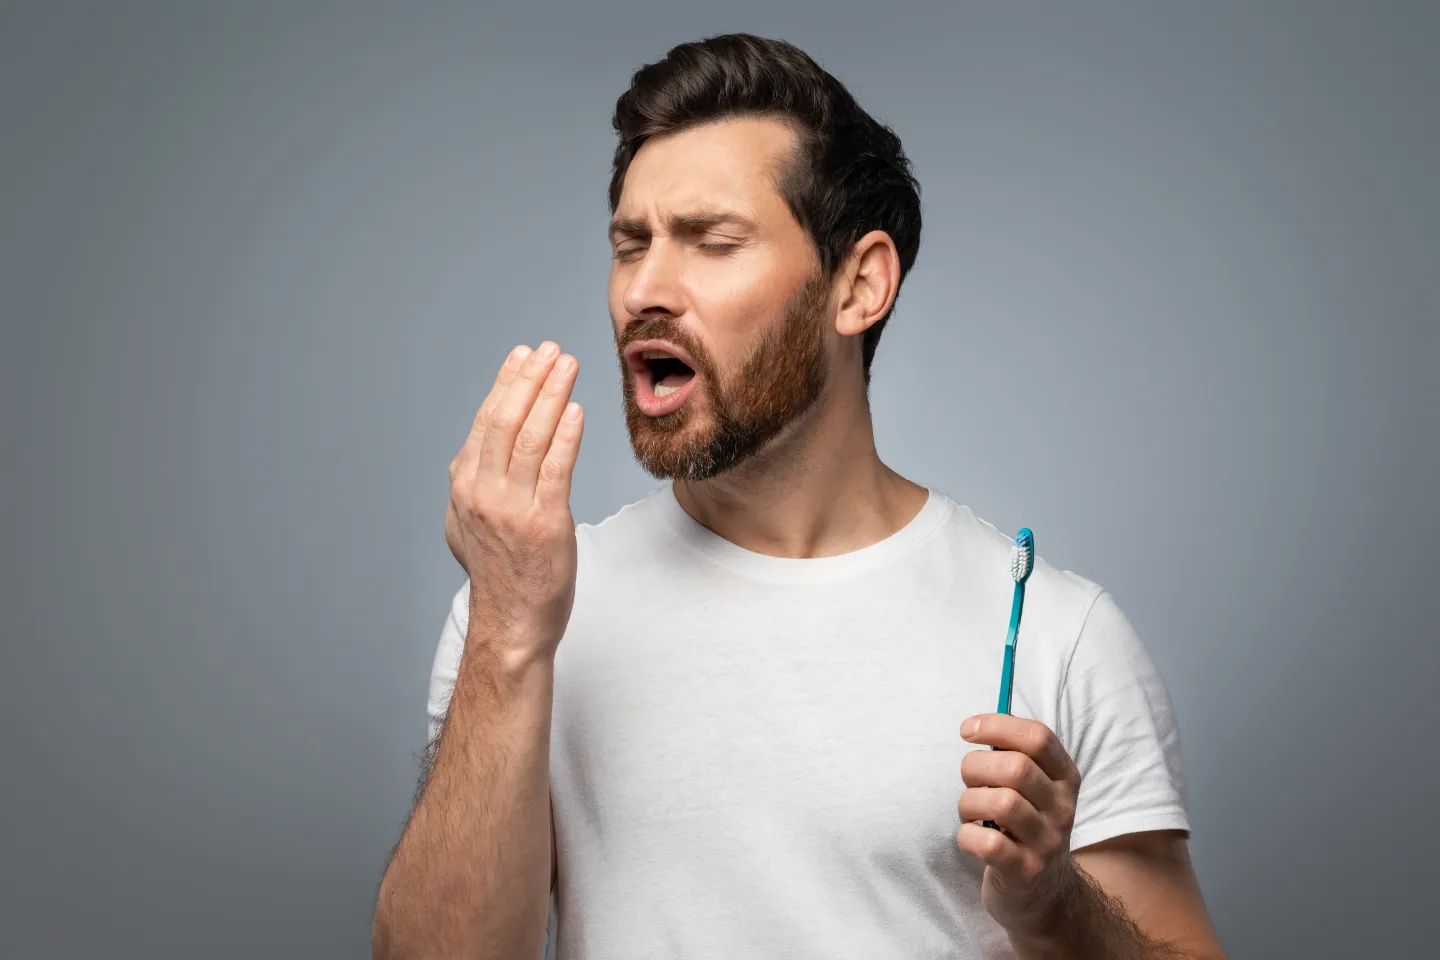 Dry Mouth (Xerostomia) and Its Role in Bad Breath
